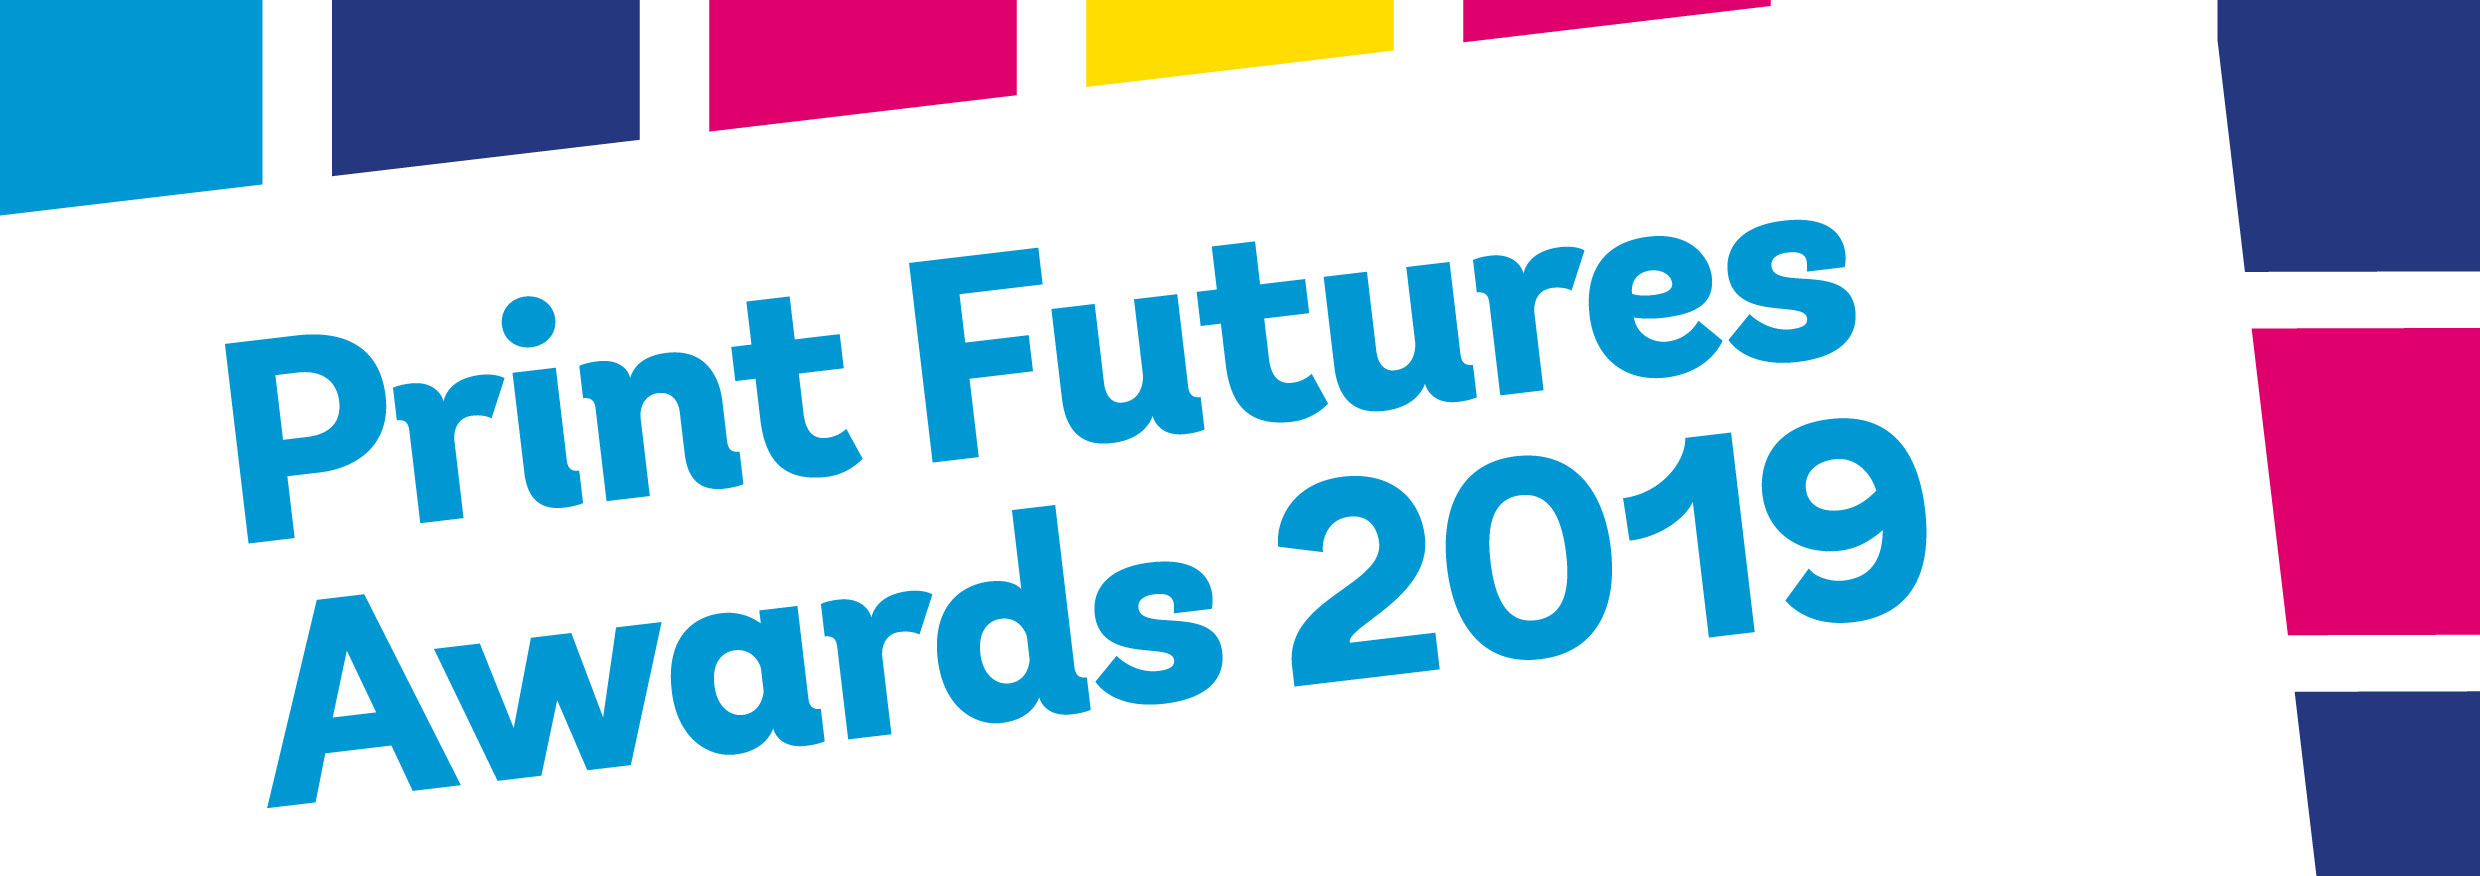 The 2019 Print Futures Awards are open for entries